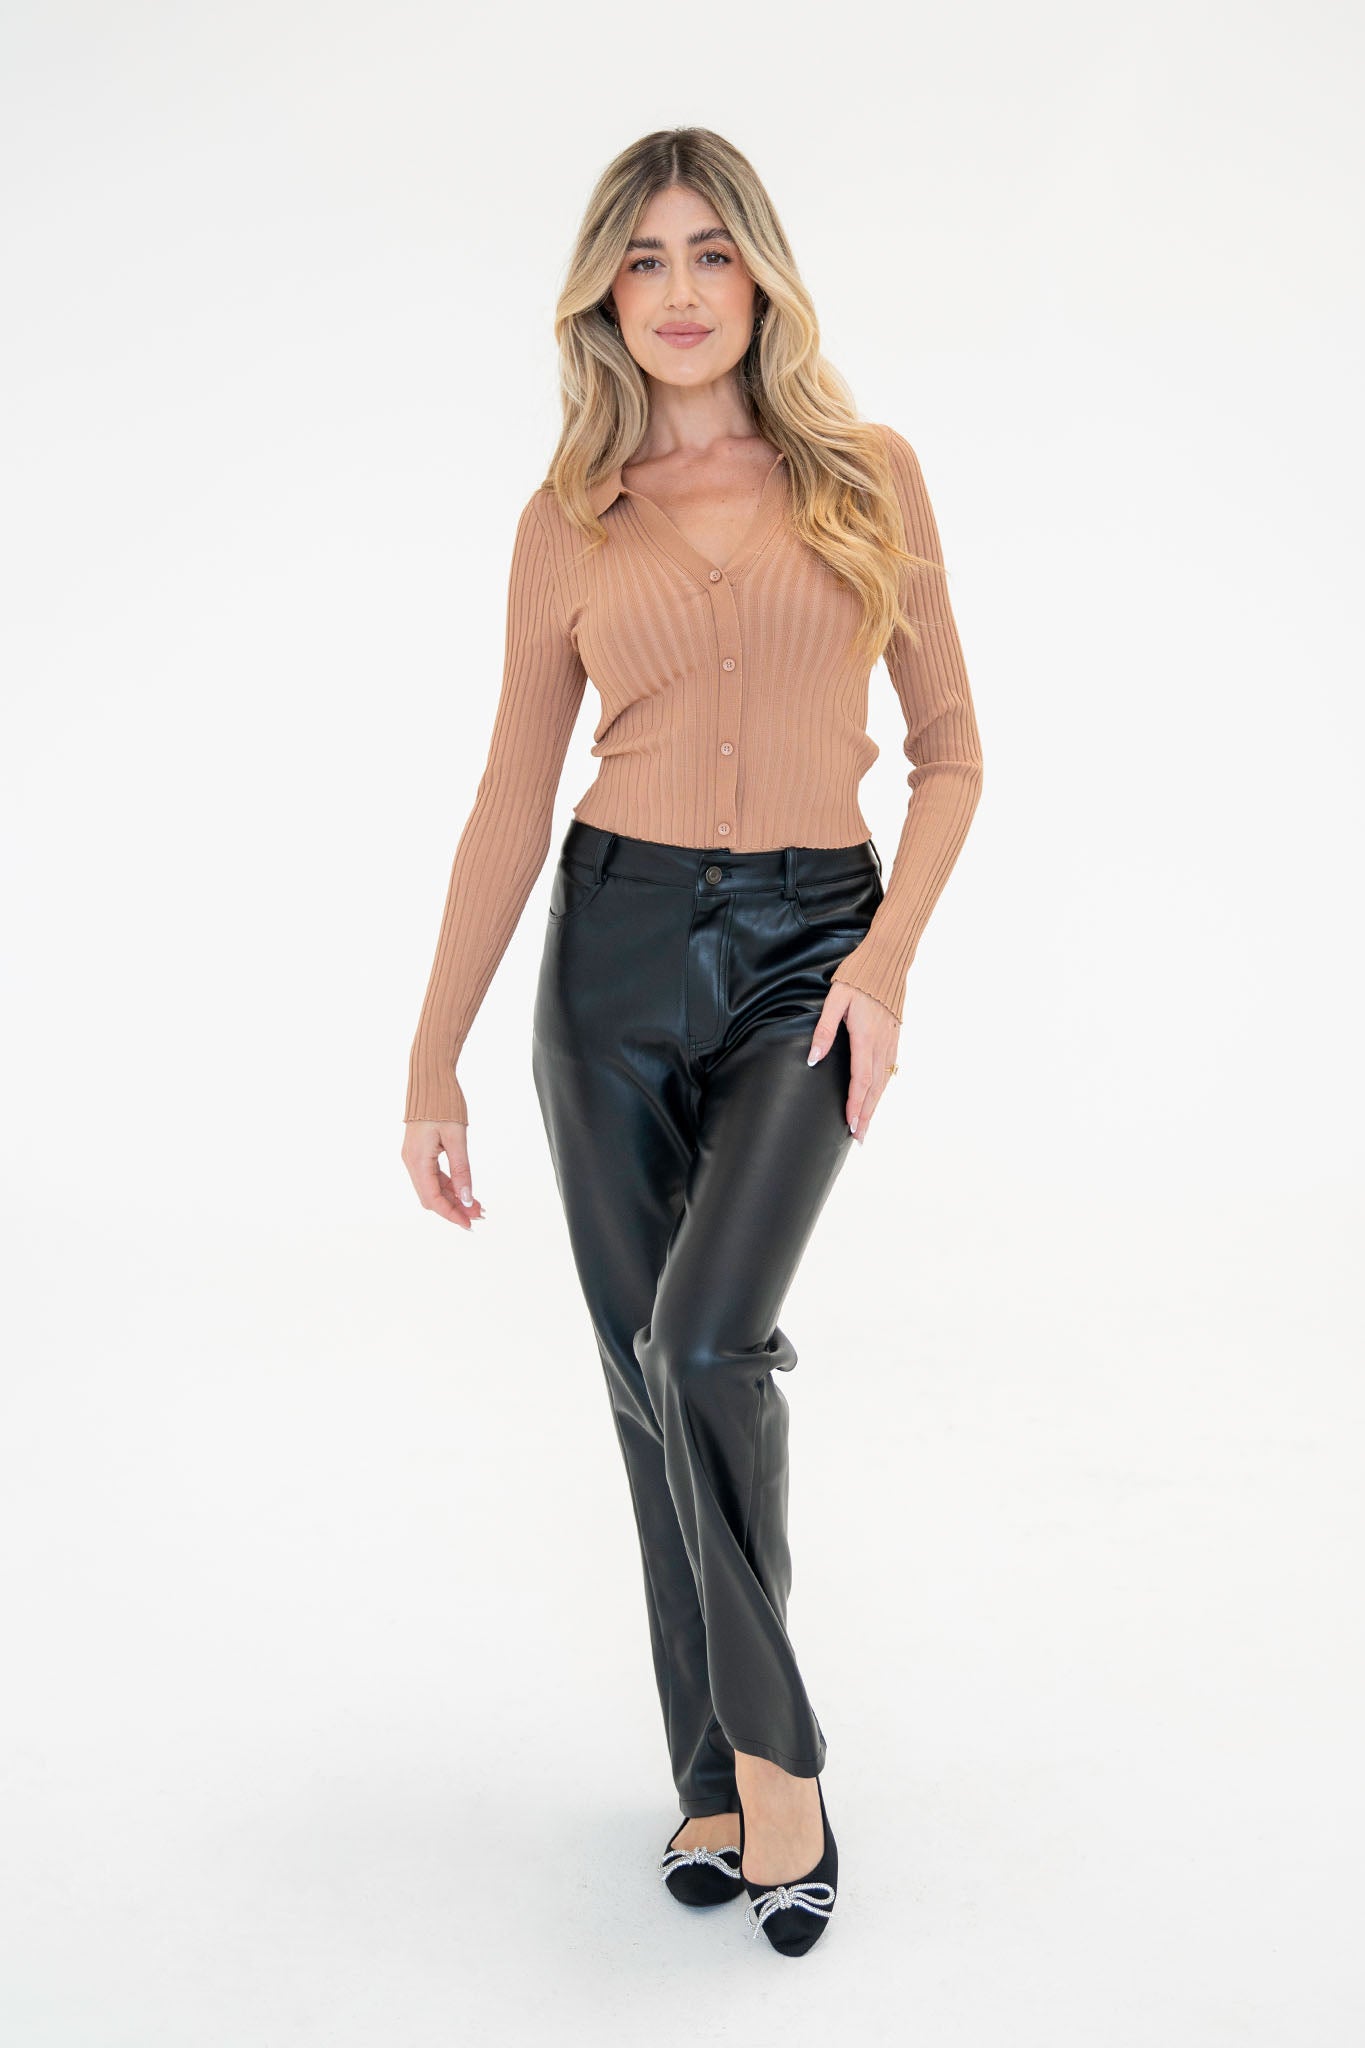 View 2 of Raywood Straight Leg Vegan Leather Pants, a Pants from Larrea Cove. Detail: .